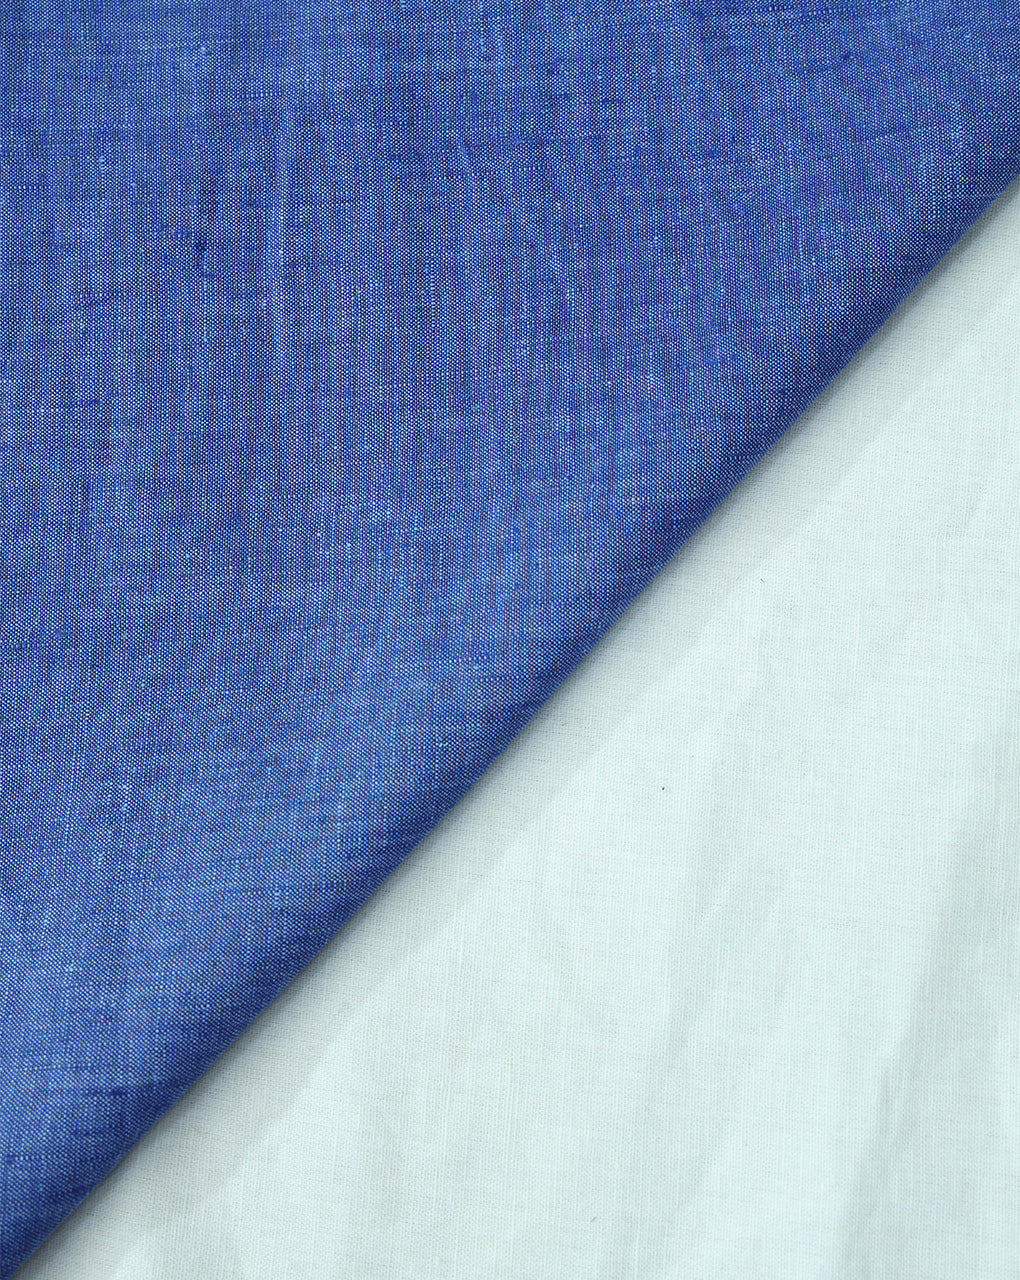 INK BLUE LINEN SUITING FABRIC